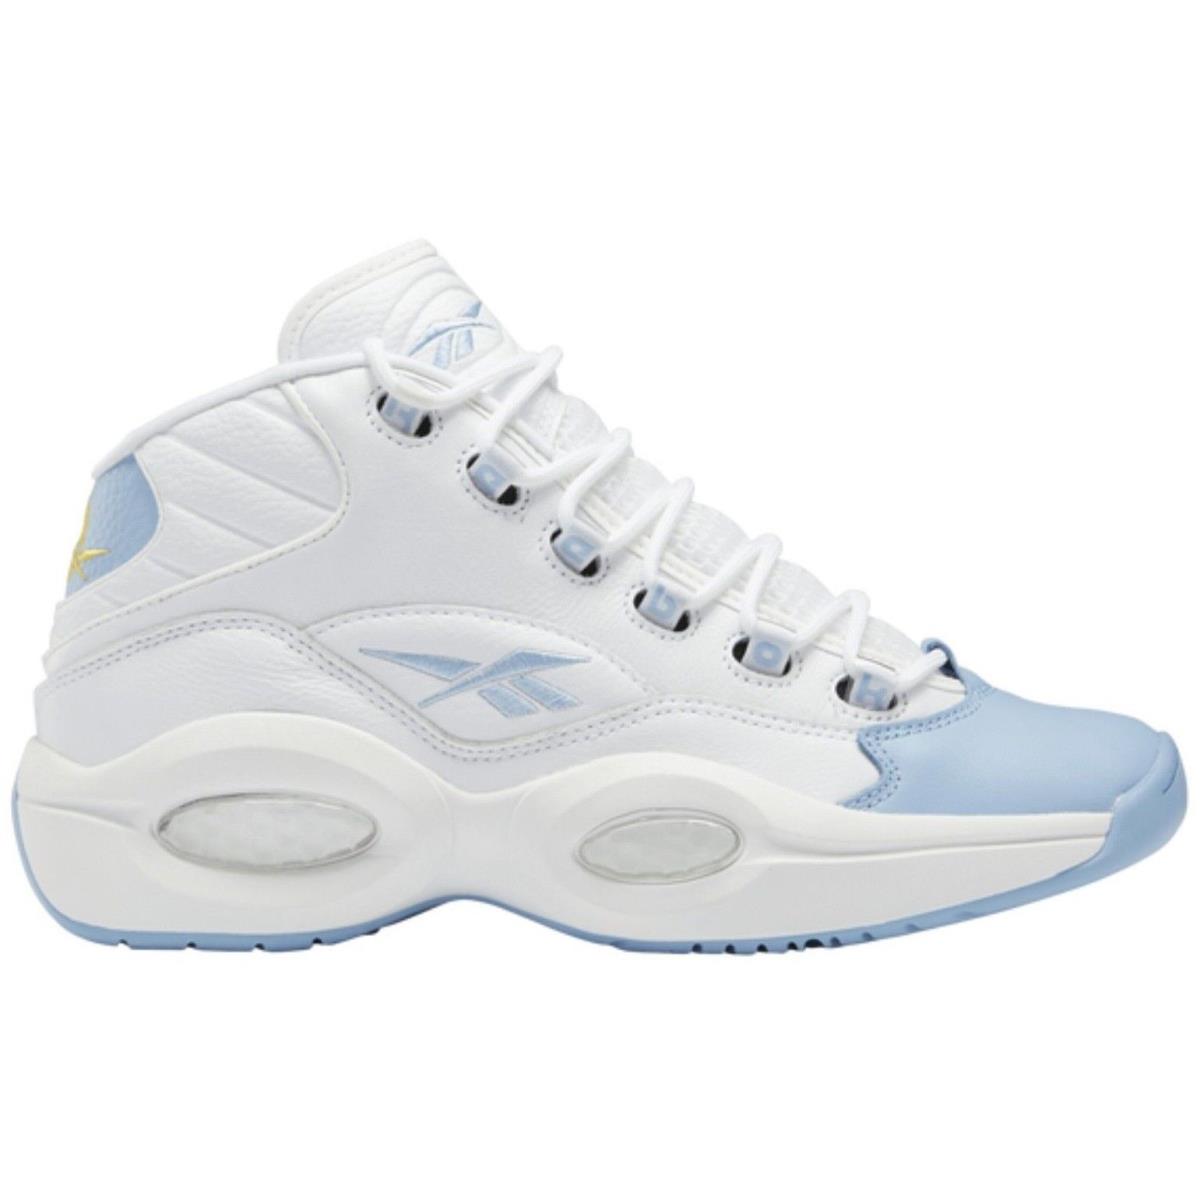 Reebok Question Mid Men`s Basketball Shoes All Colors US Sizes 7-14 White / Carolina Blue